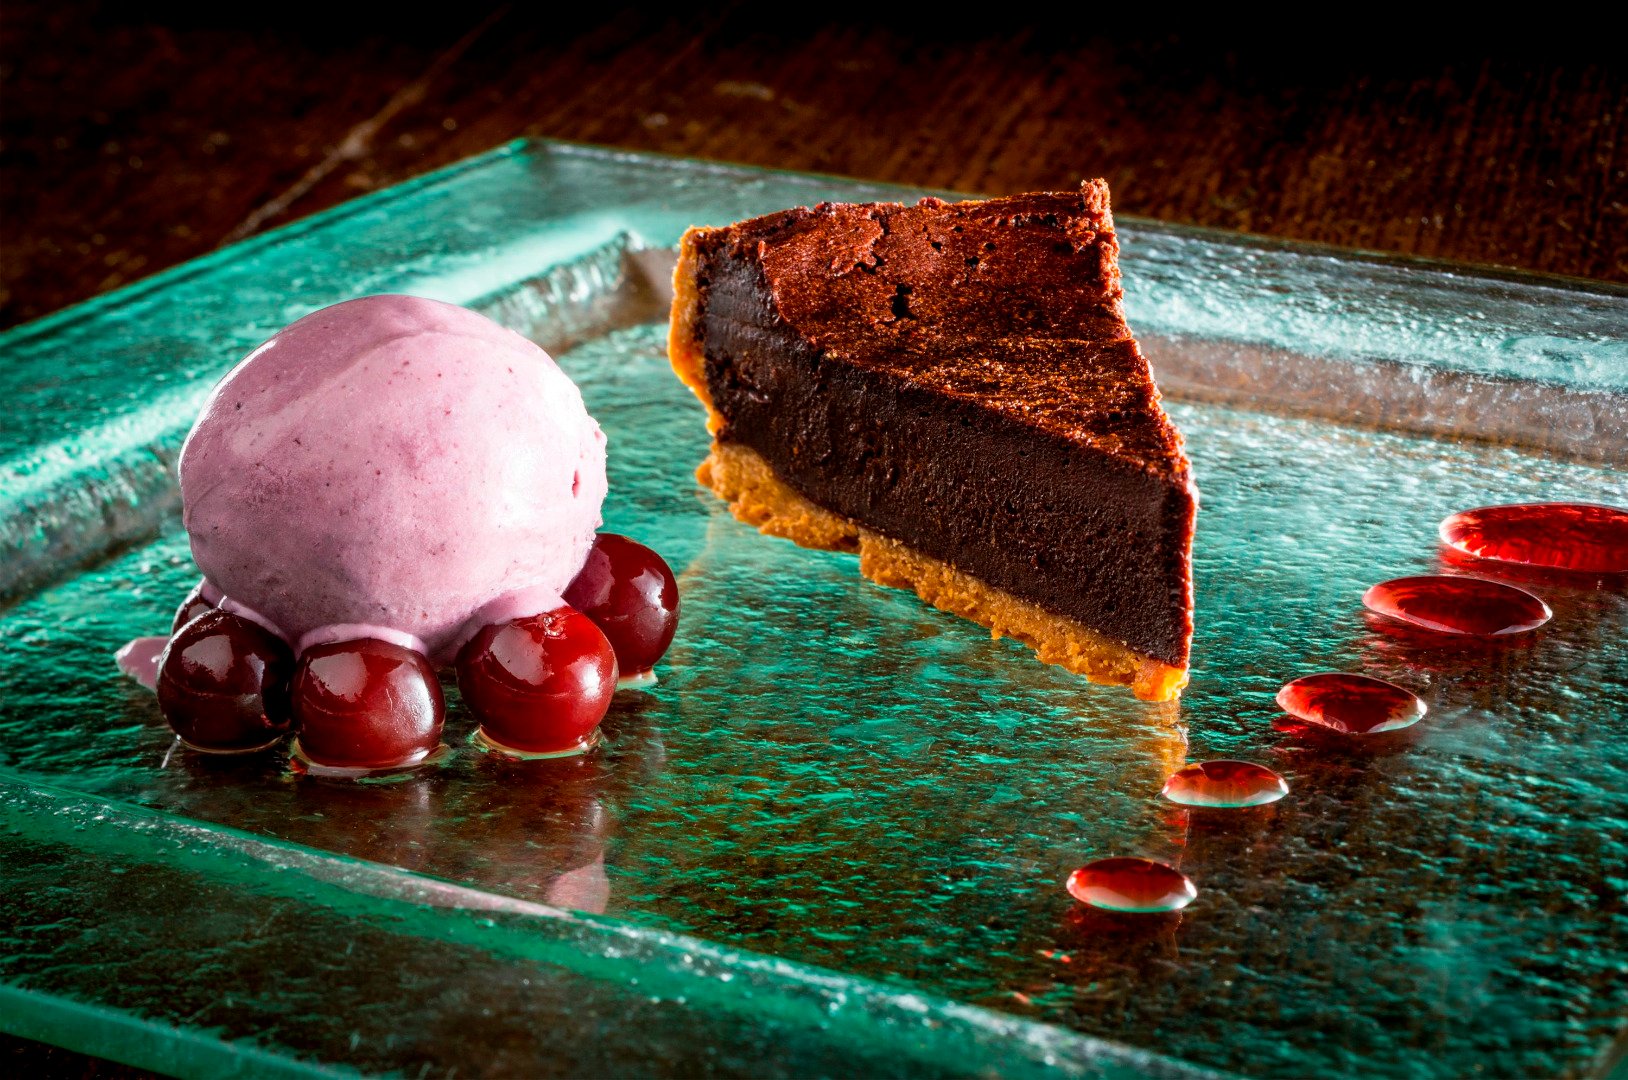 Image name homemade chocolate tart with cherry ice cream cherries the blue lion inn east witton the good pub guide inn of the year 20141 the 13 image from the post Eating out in the Yorkshire Dales in Yorkshire.com.